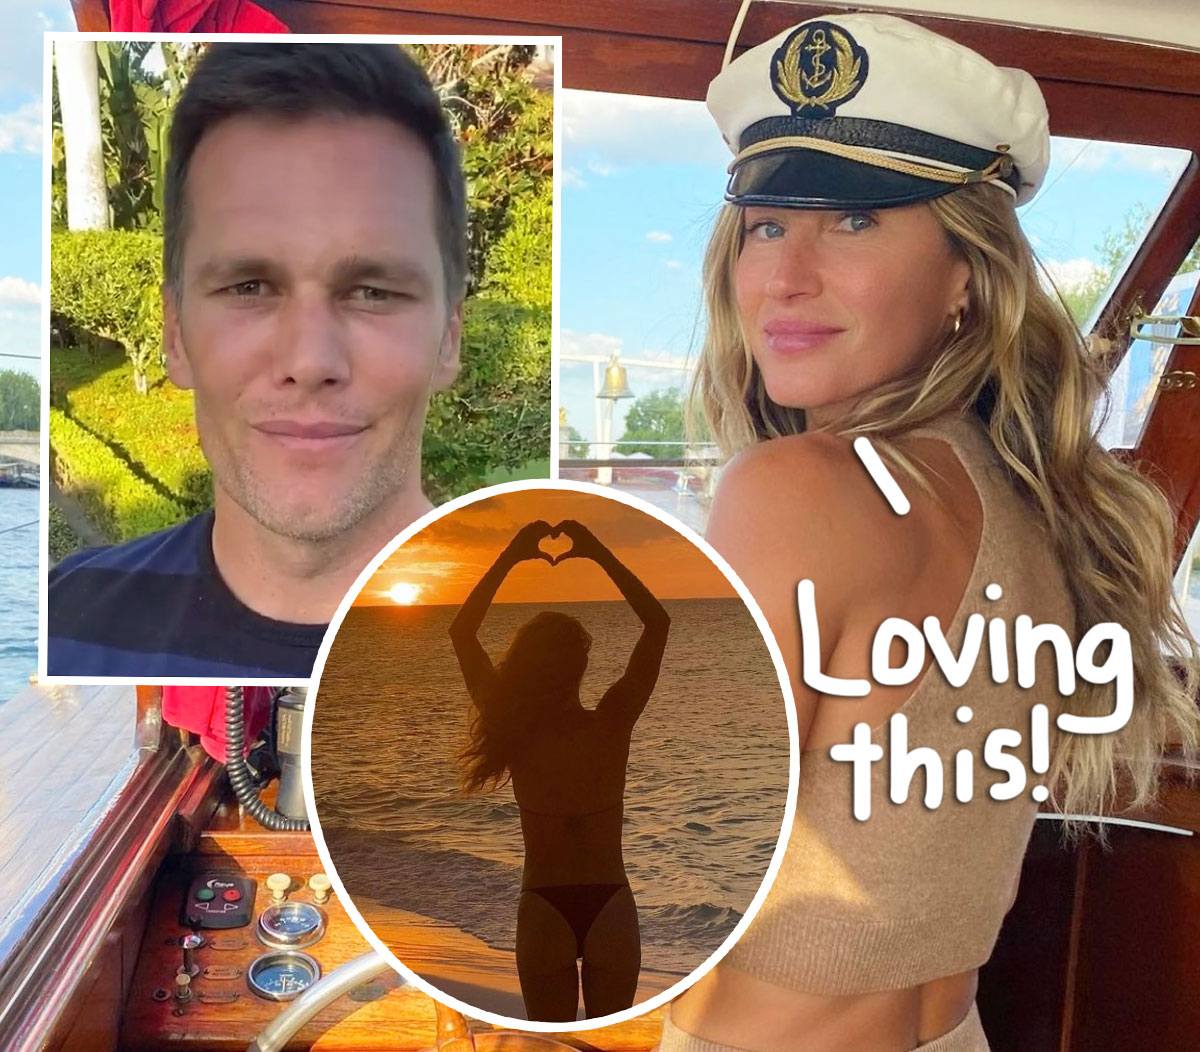 #Gisele Bündchen Is Living Her Best Life In Costa Rica Days After Finalizing Tom Brady Divorce!